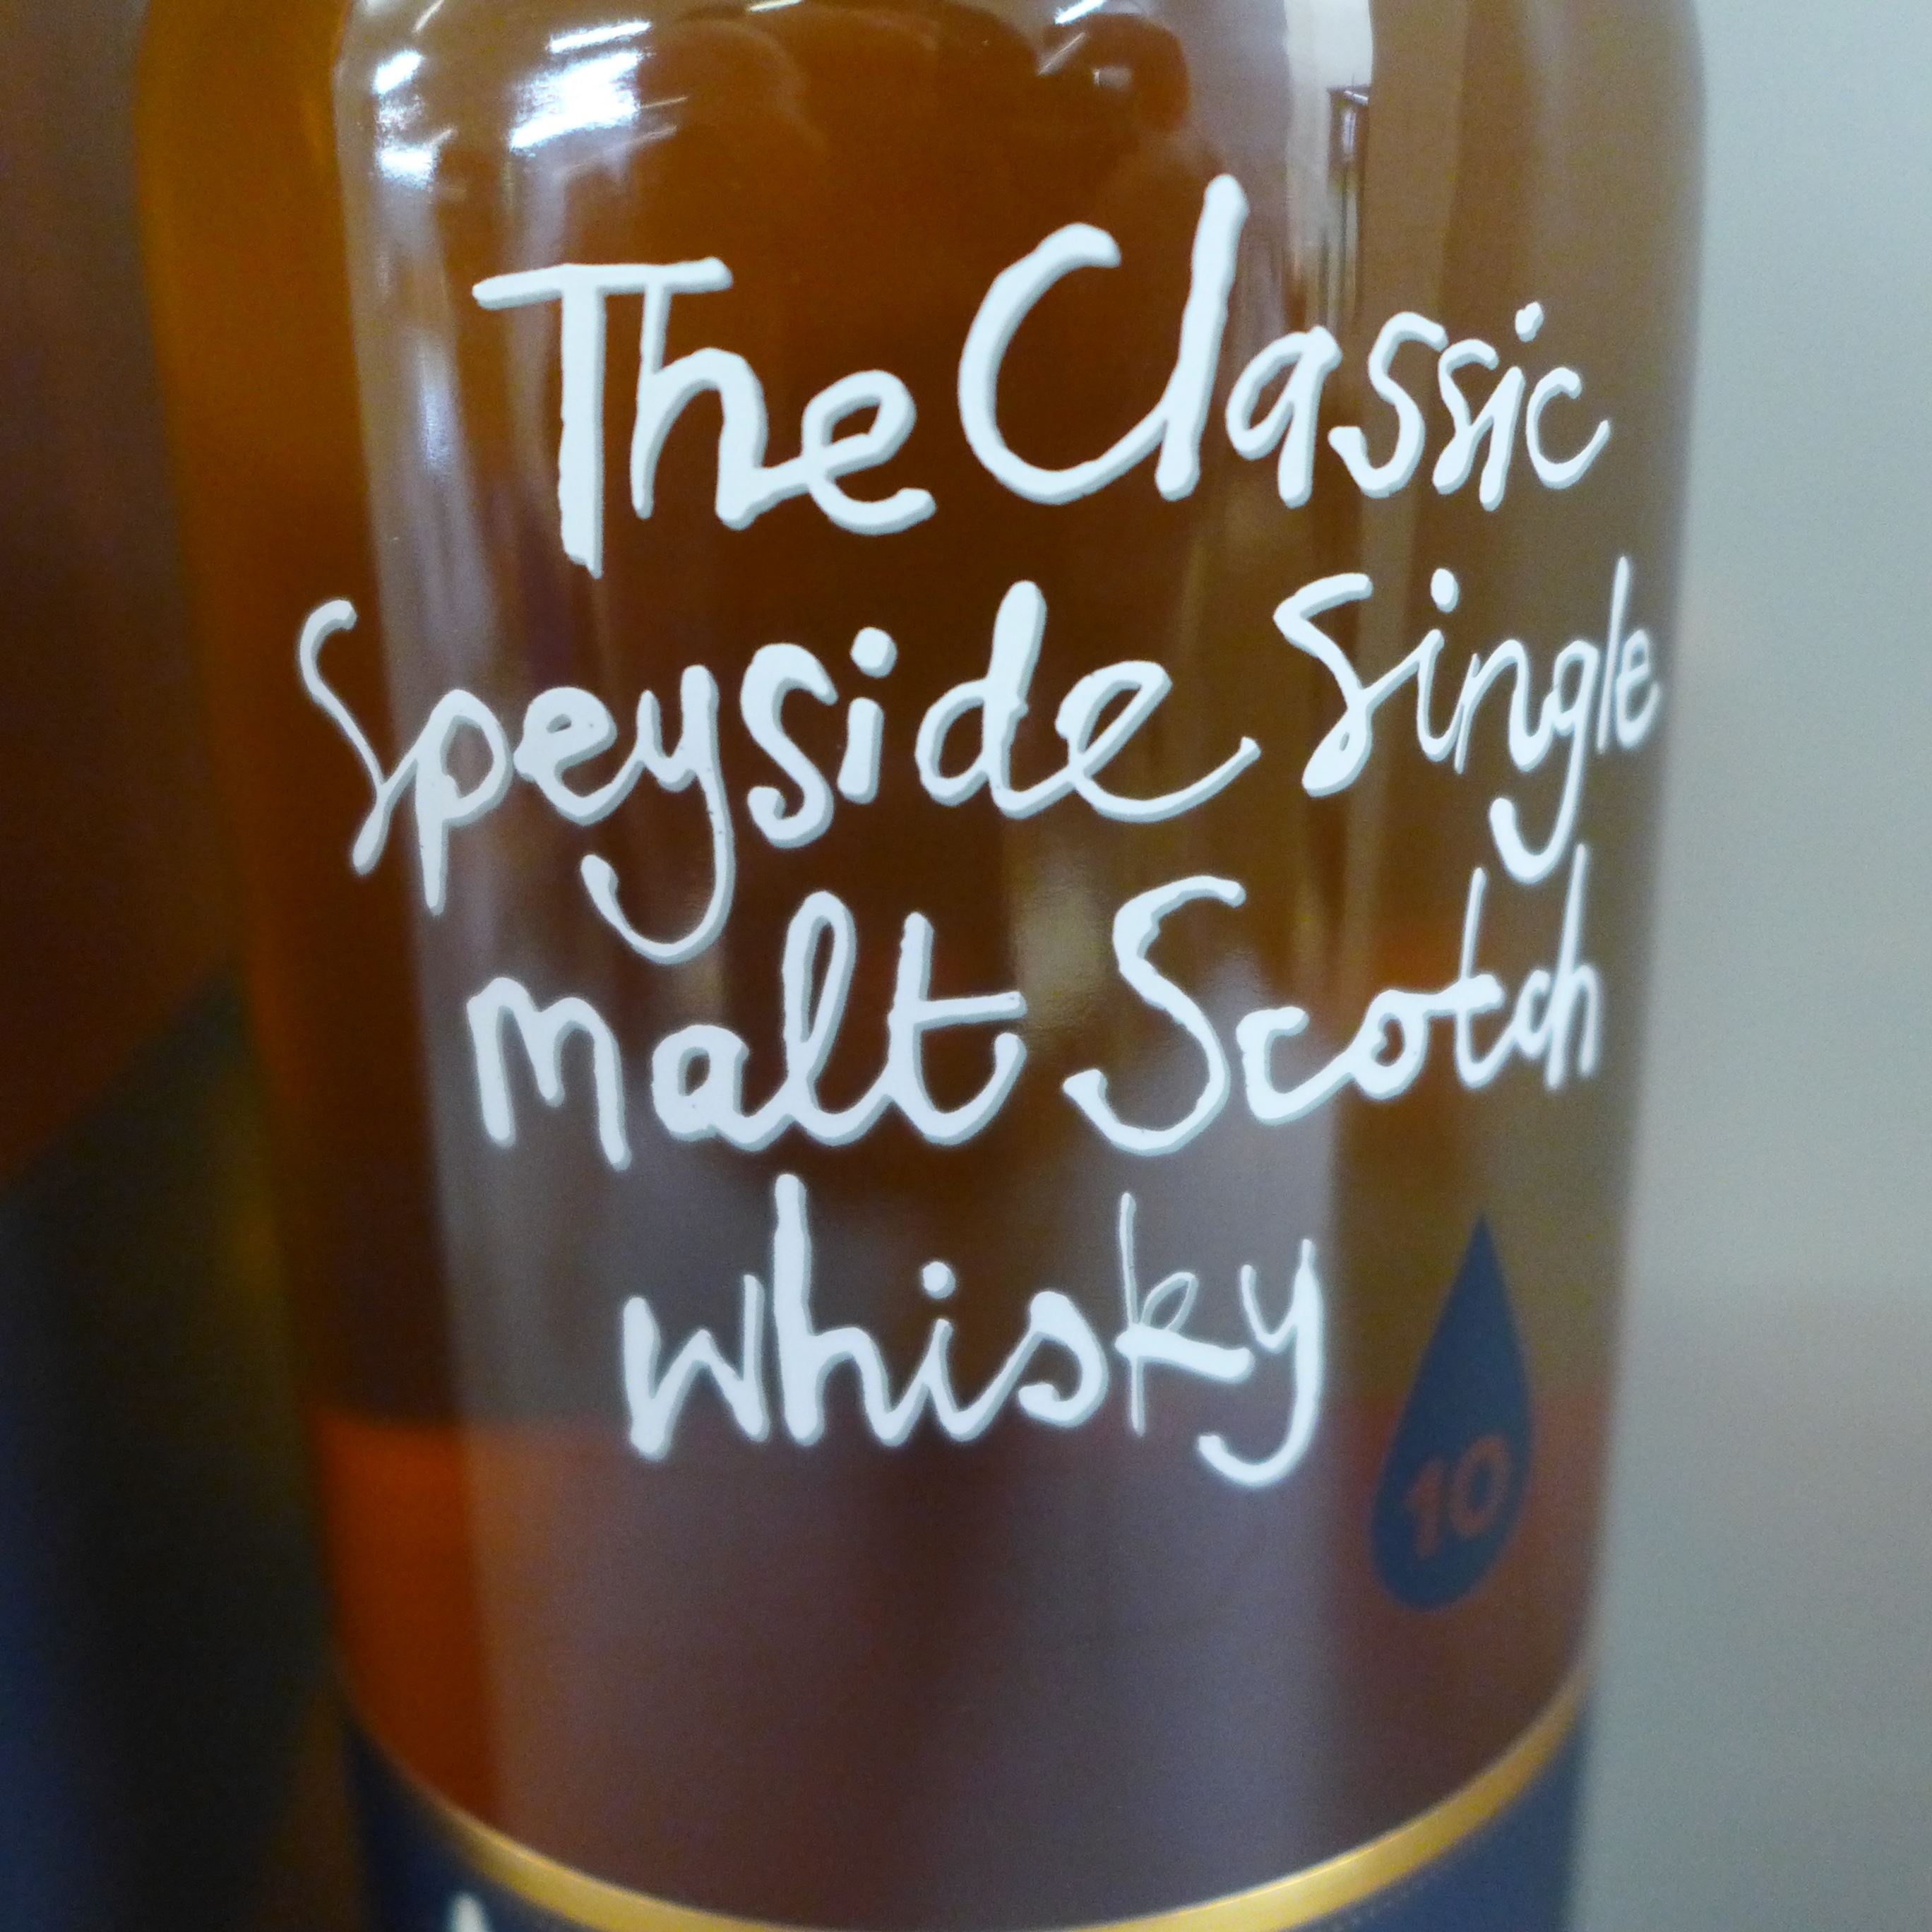 A bottle of Benromach Speyside Single Malt Scotch Whisky, 10 years old, boxed - Image 3 of 4